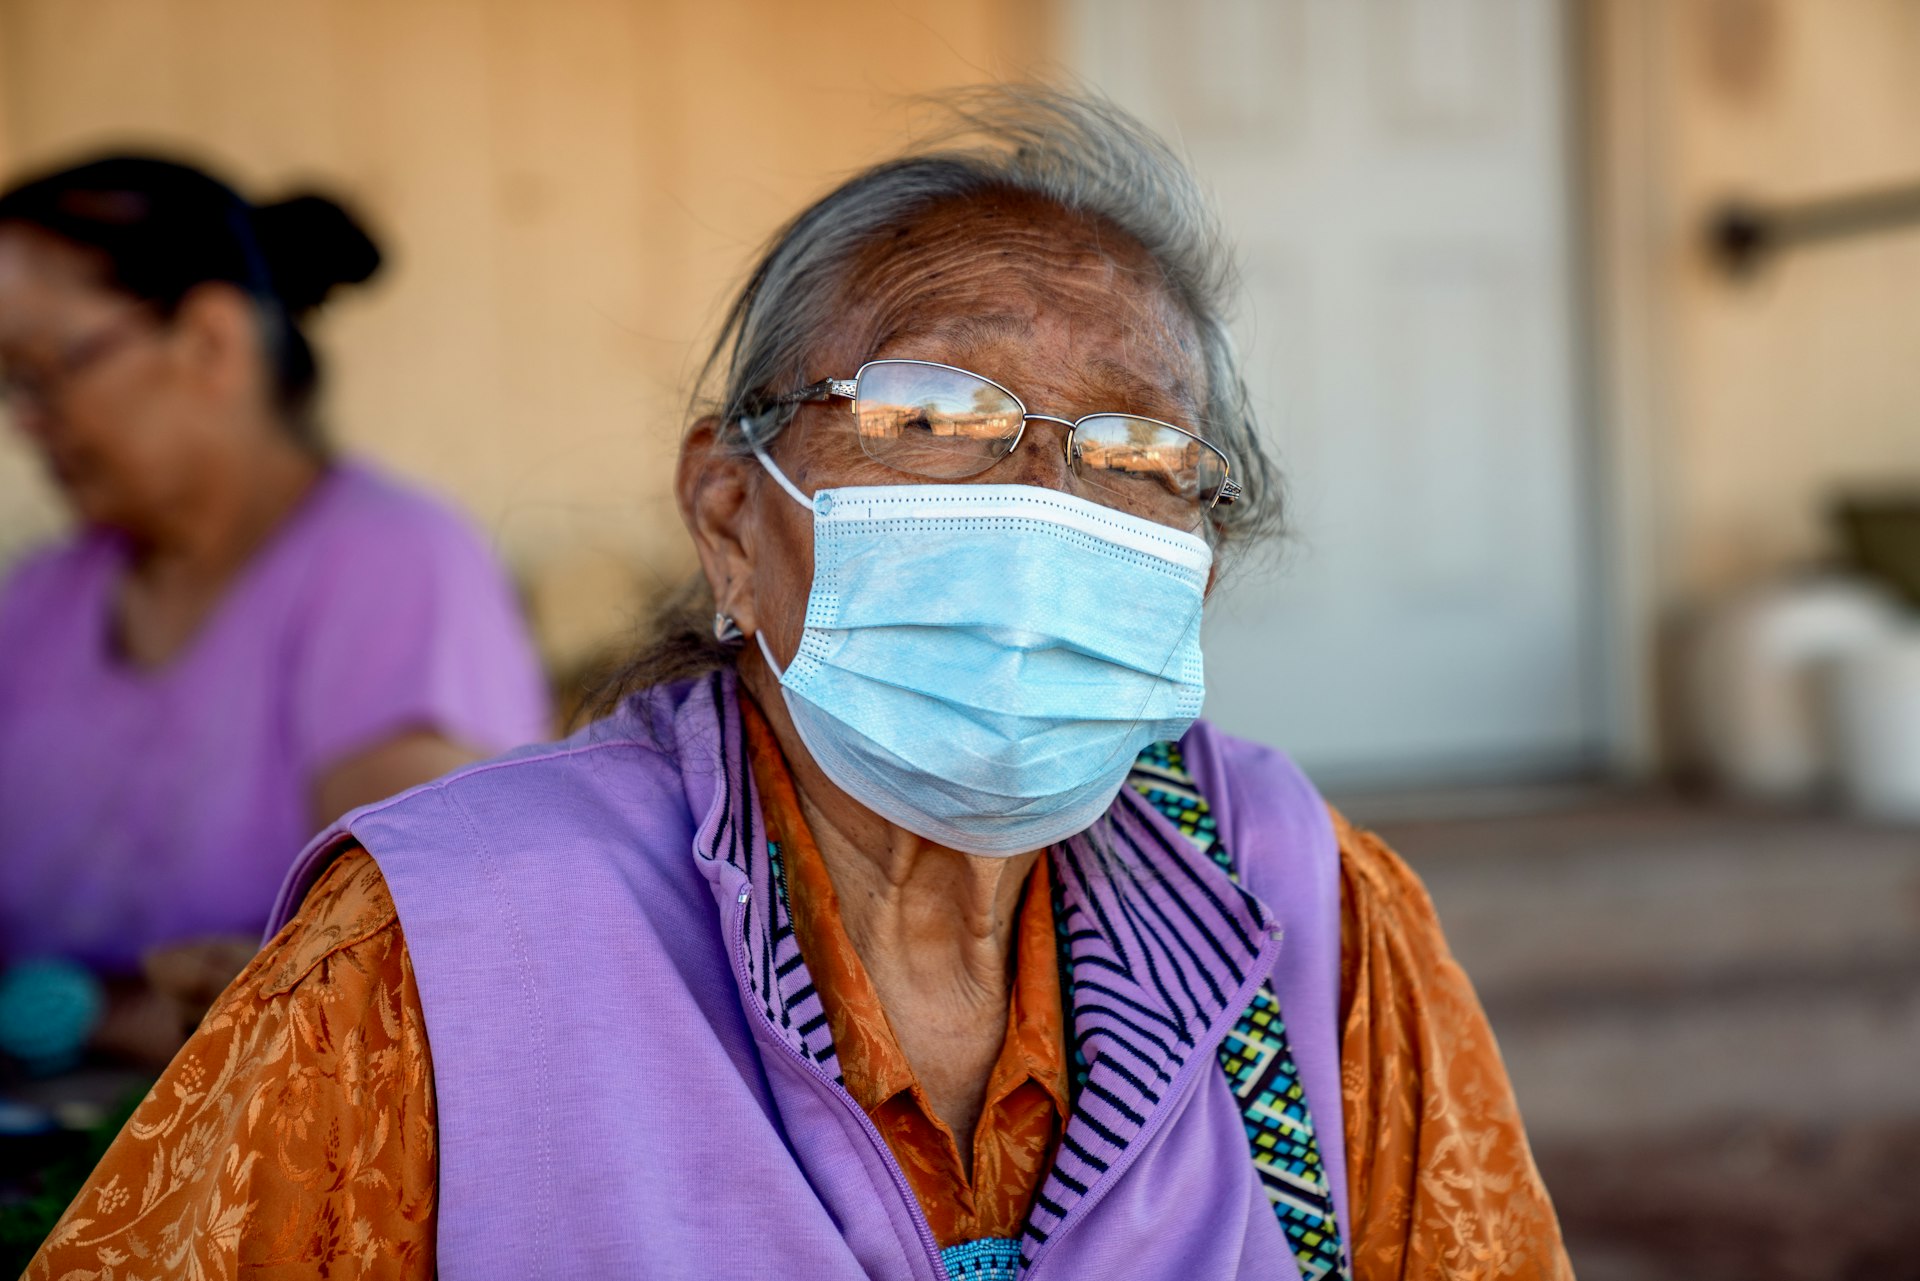 The Matriarch Of A Navajo Family Wearing A Mask At Her Home On The Reservation, Monument Valley, Covid19